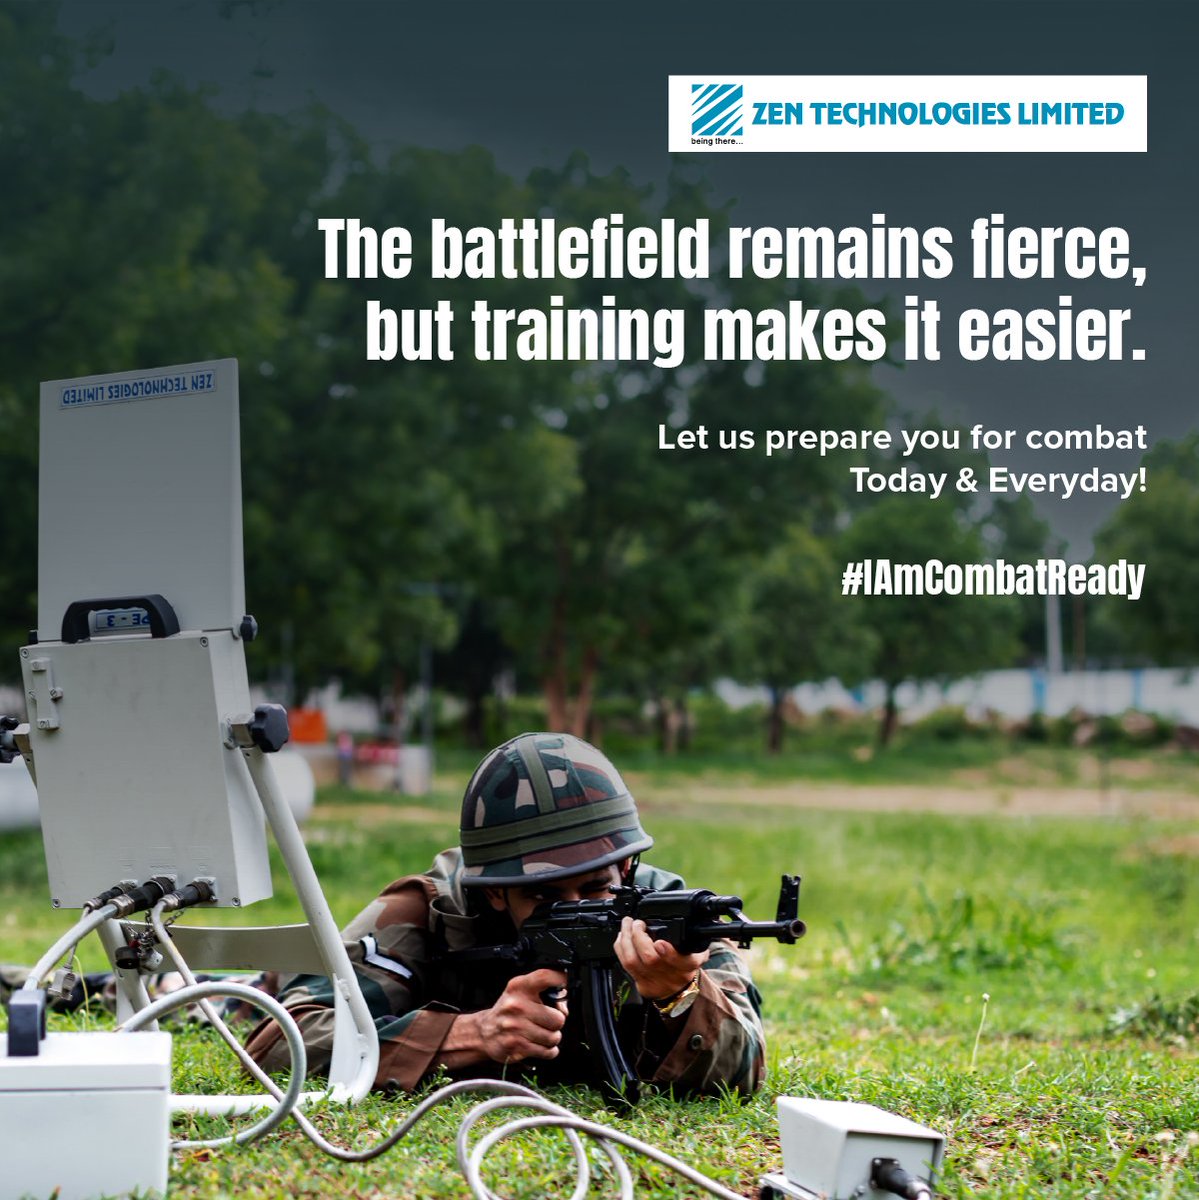 Are you combat-ready? Sharpen your edge with our innovative training systems, from live fire to virtual simulations. We offer a full spectrum of solutions to develop and measure combat readiness. Forge your path to victory by choosing Zen Technologies.​ Visit website: